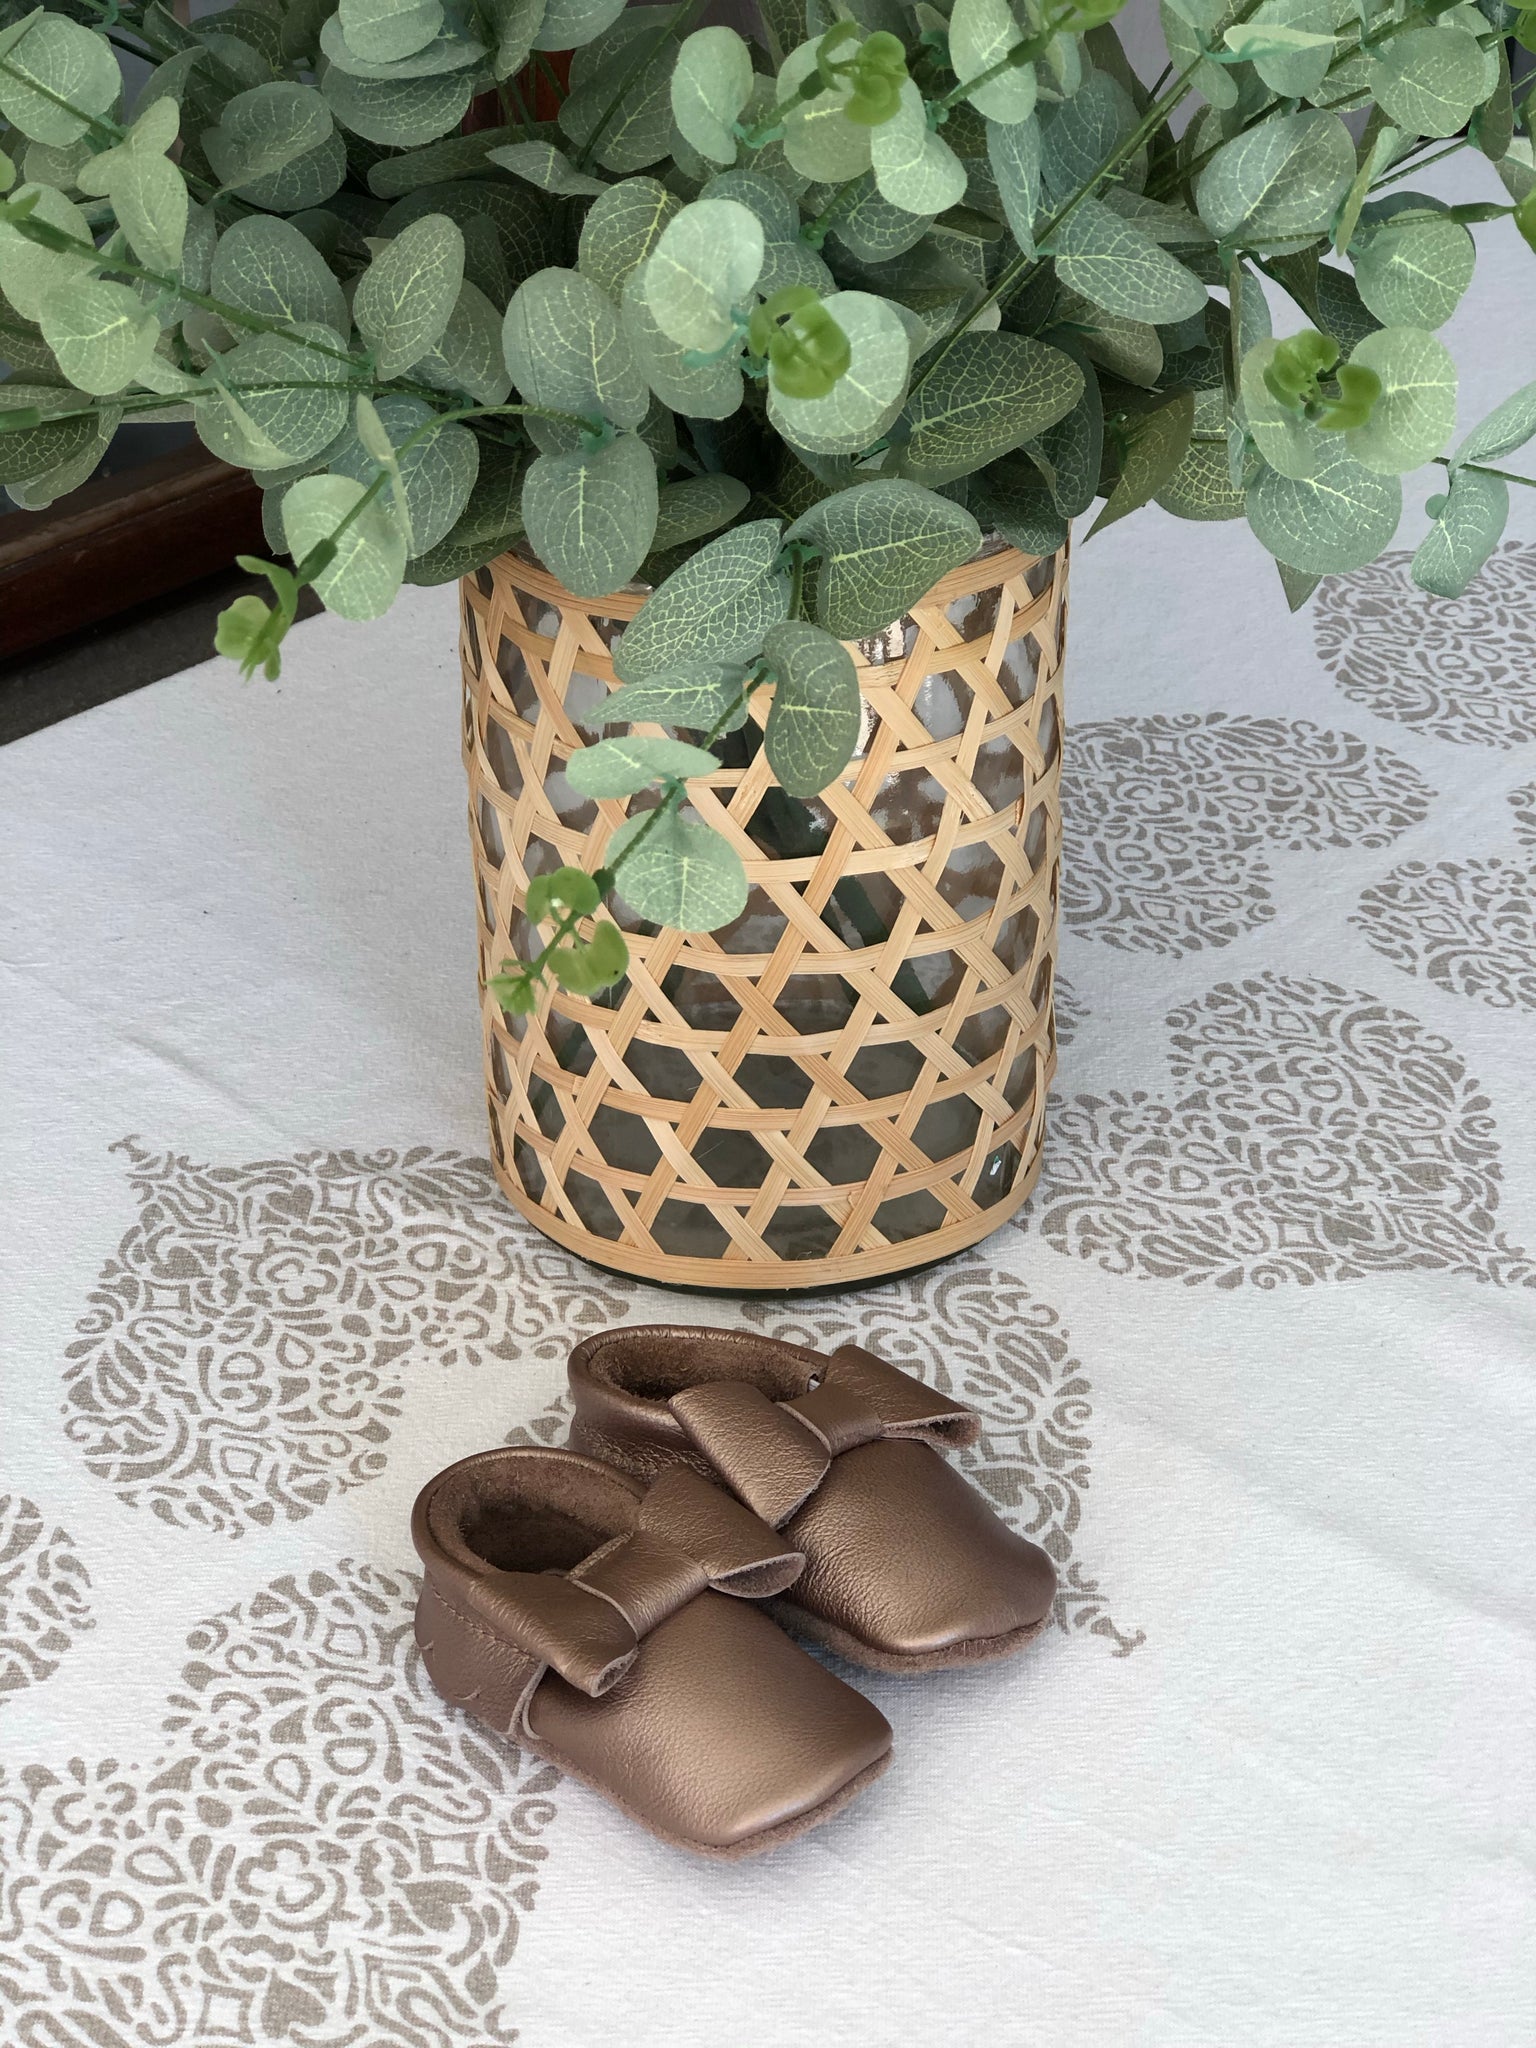 Genuine Leather brand new baby shoes - Sizes 1+2